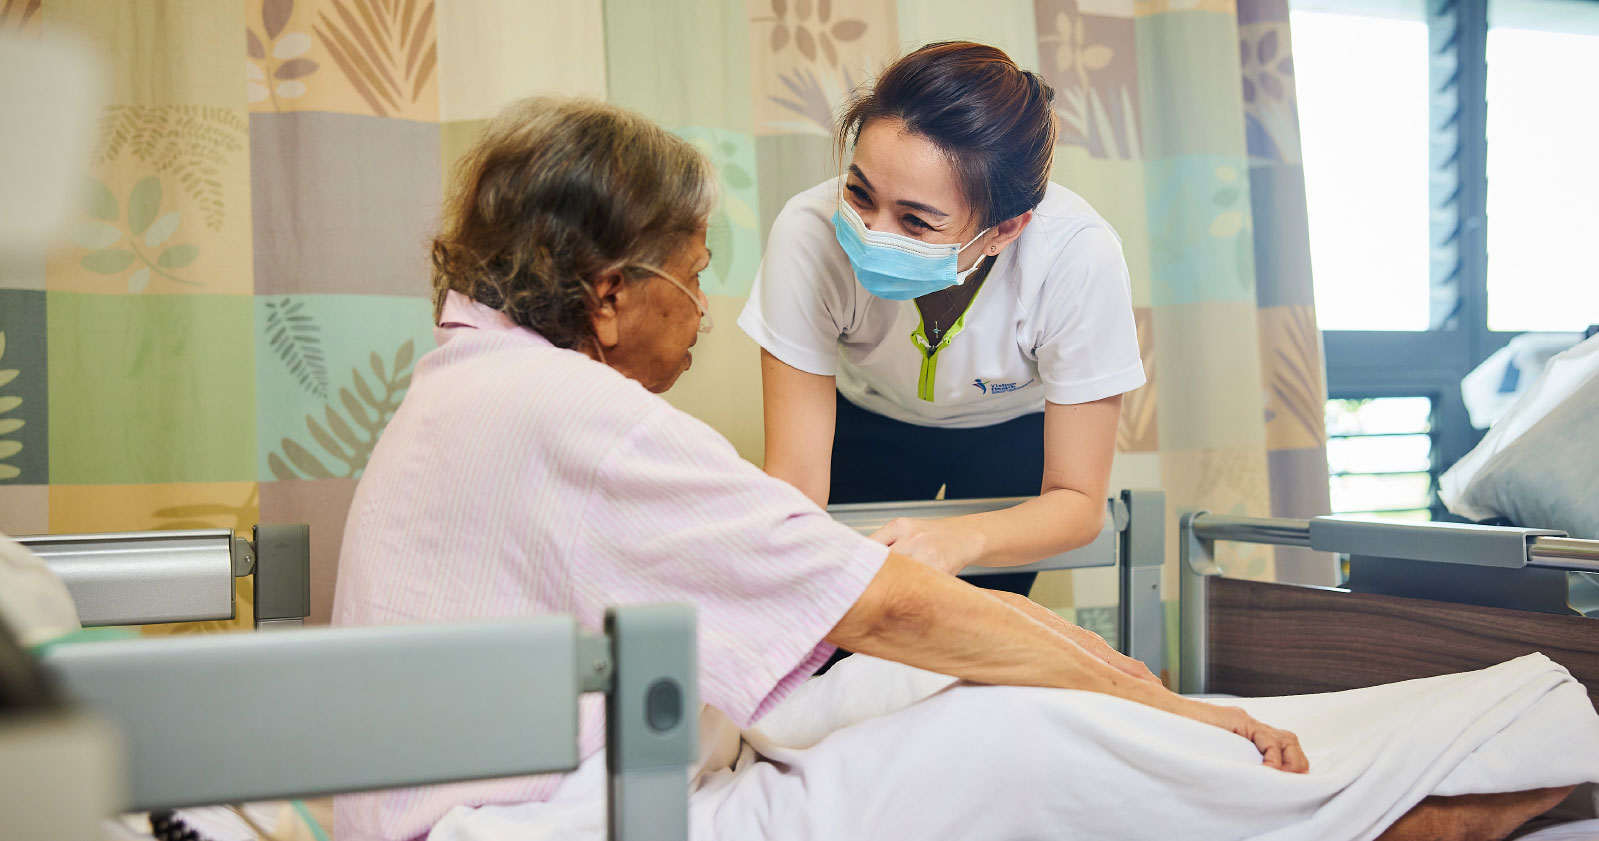 Ms Goh tends to an elderly patient at KTPH.